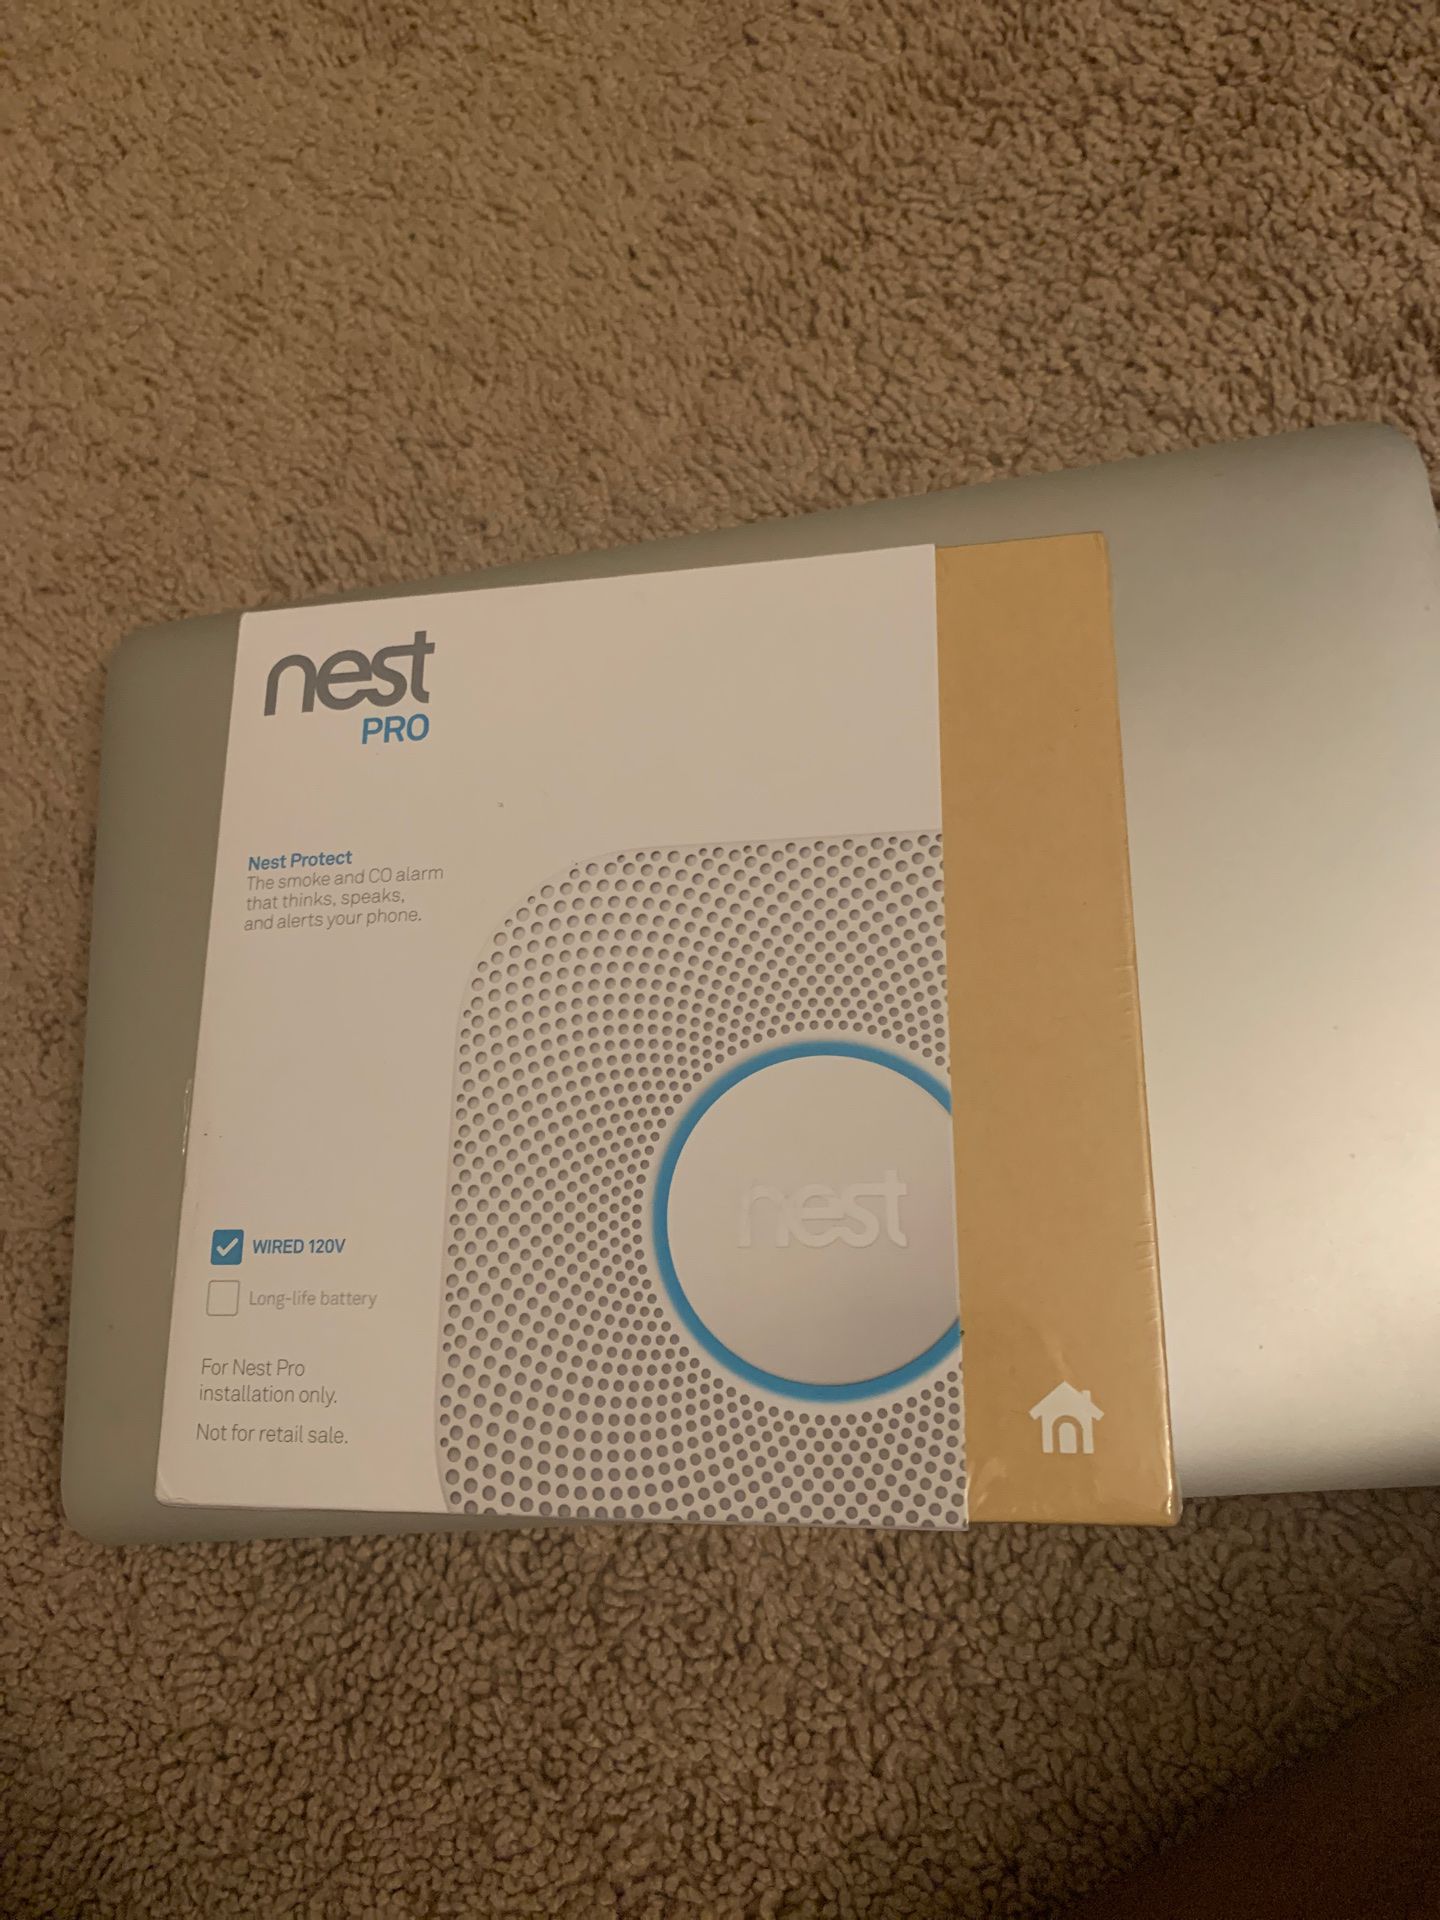 Nest protect 2nd gen wired smoke and carbon alarm {url removed} actual price is 119 just opened the box and found it wired but never used